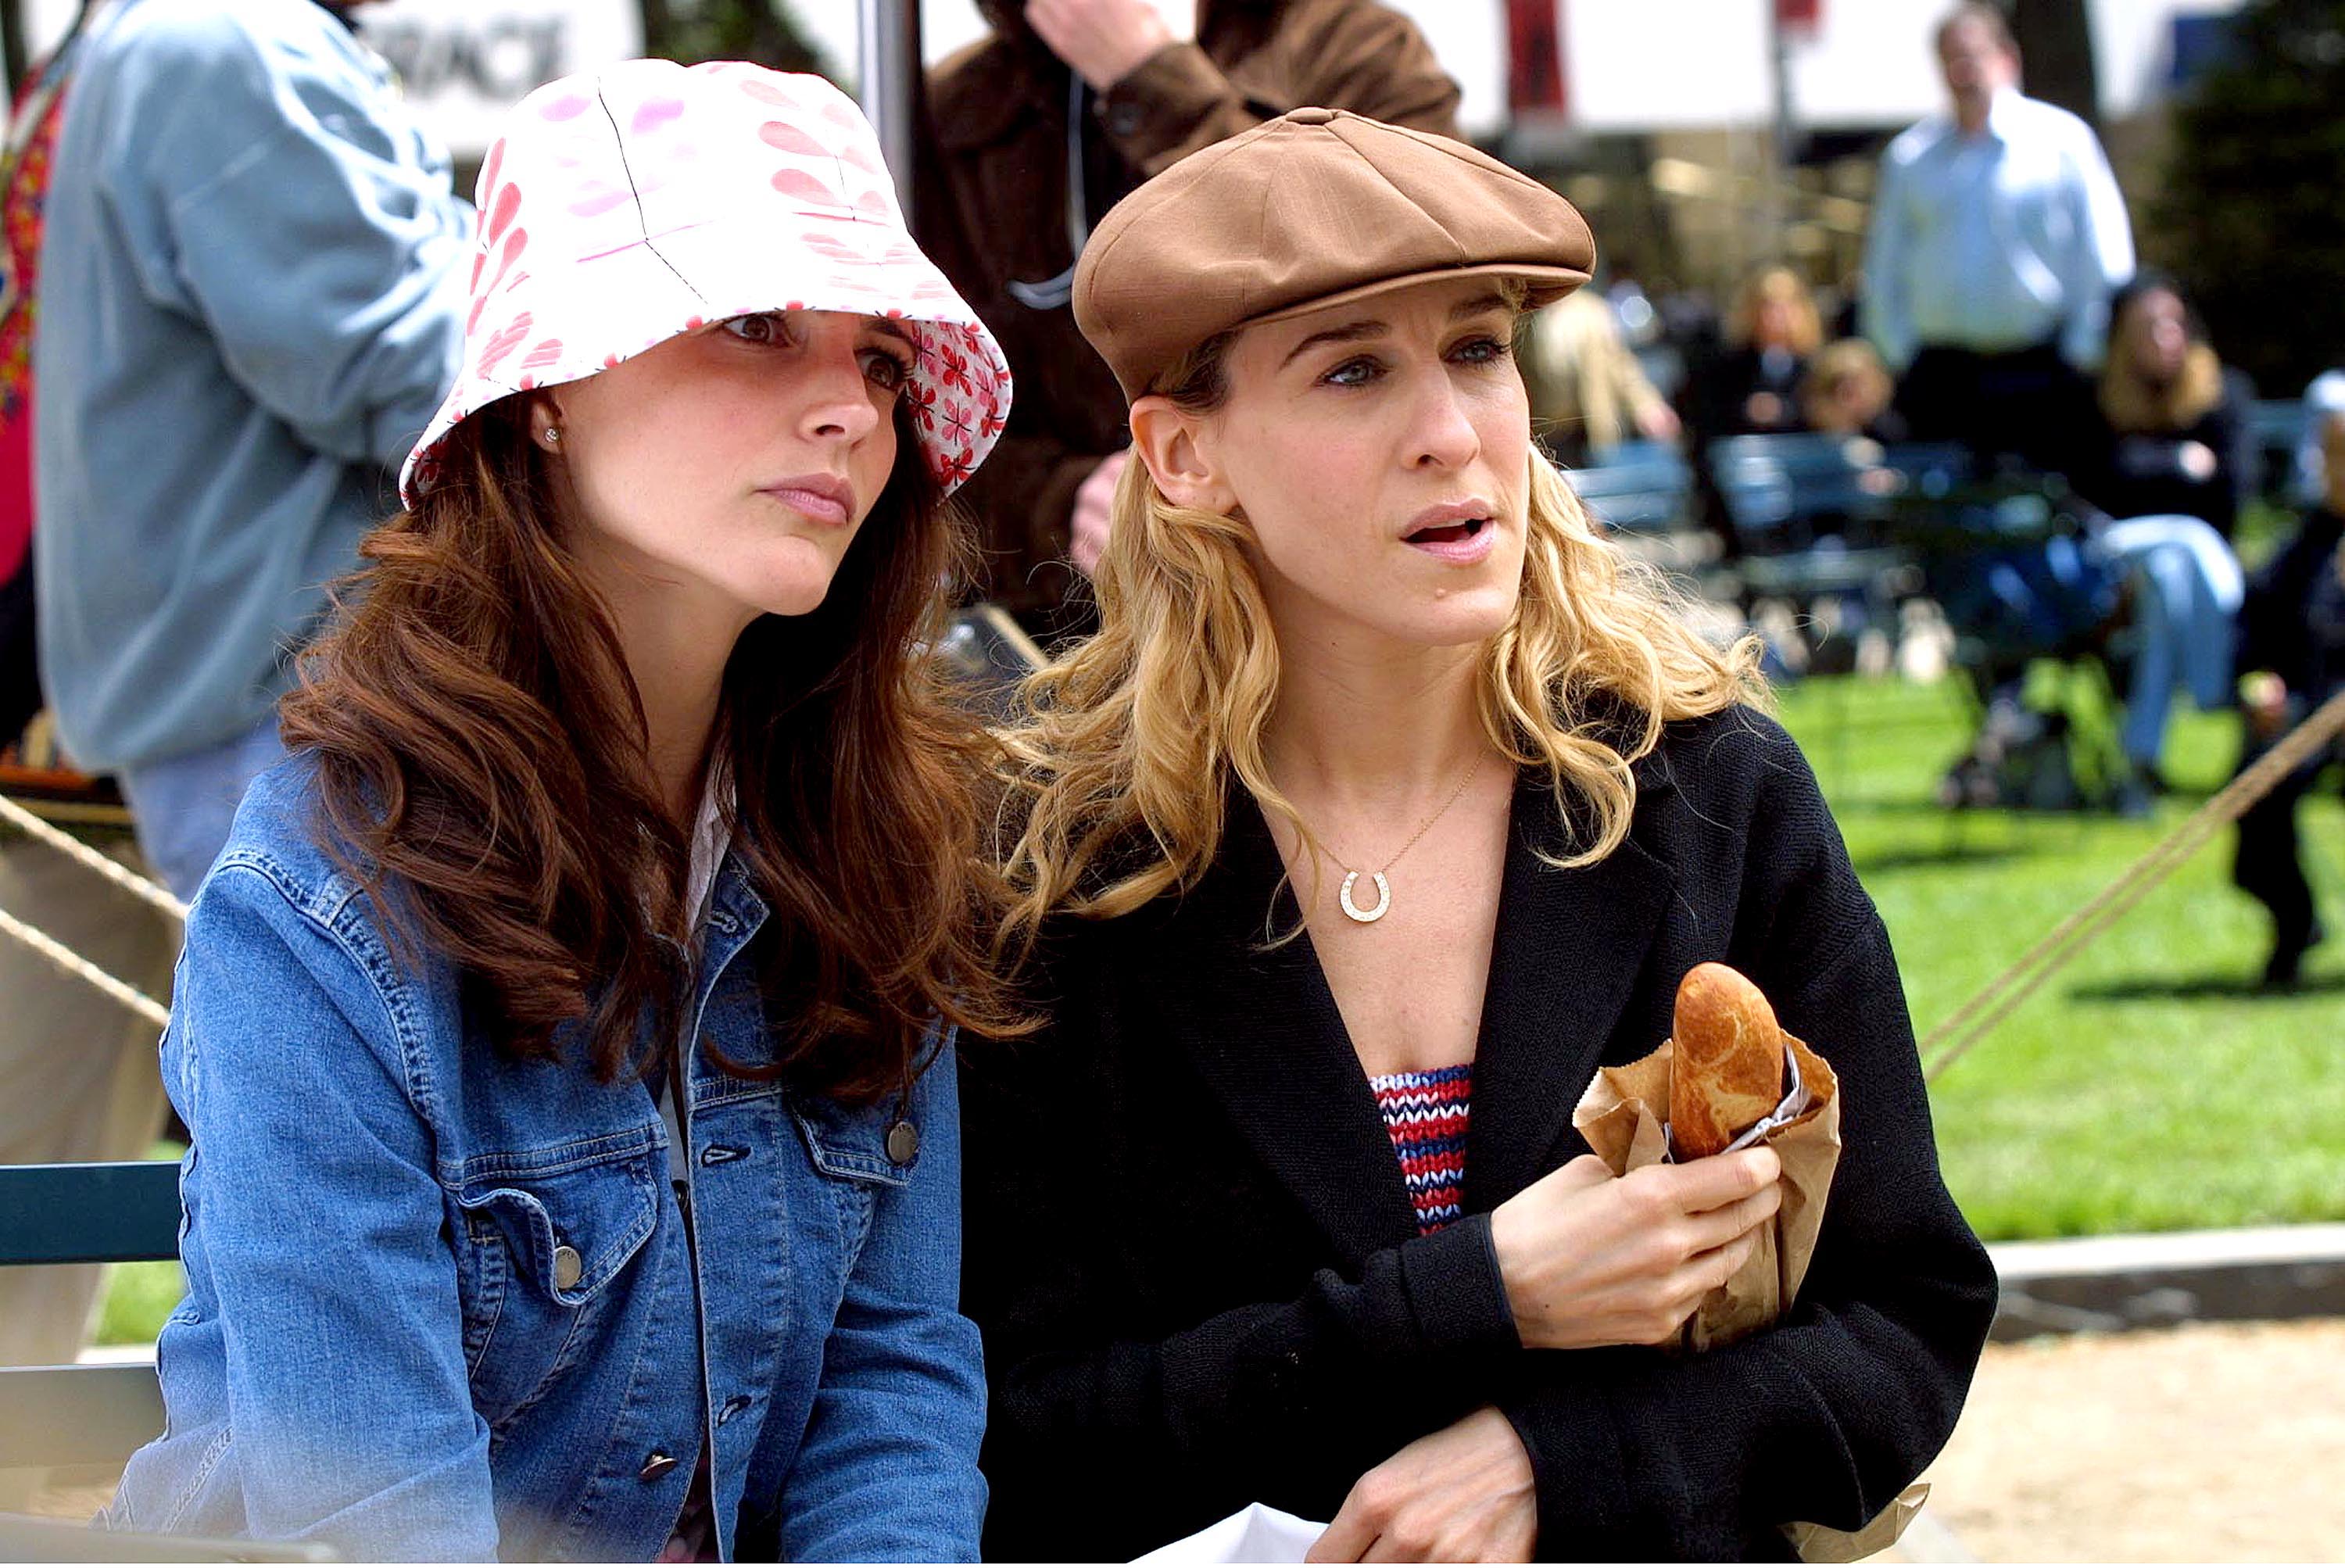 Kristin Davis as Charlotte York and Sarah Jessica Parker as Carrie Bradshsaw sitting on a bench in Central Park during a scene for 'Sex and the City' in 2001